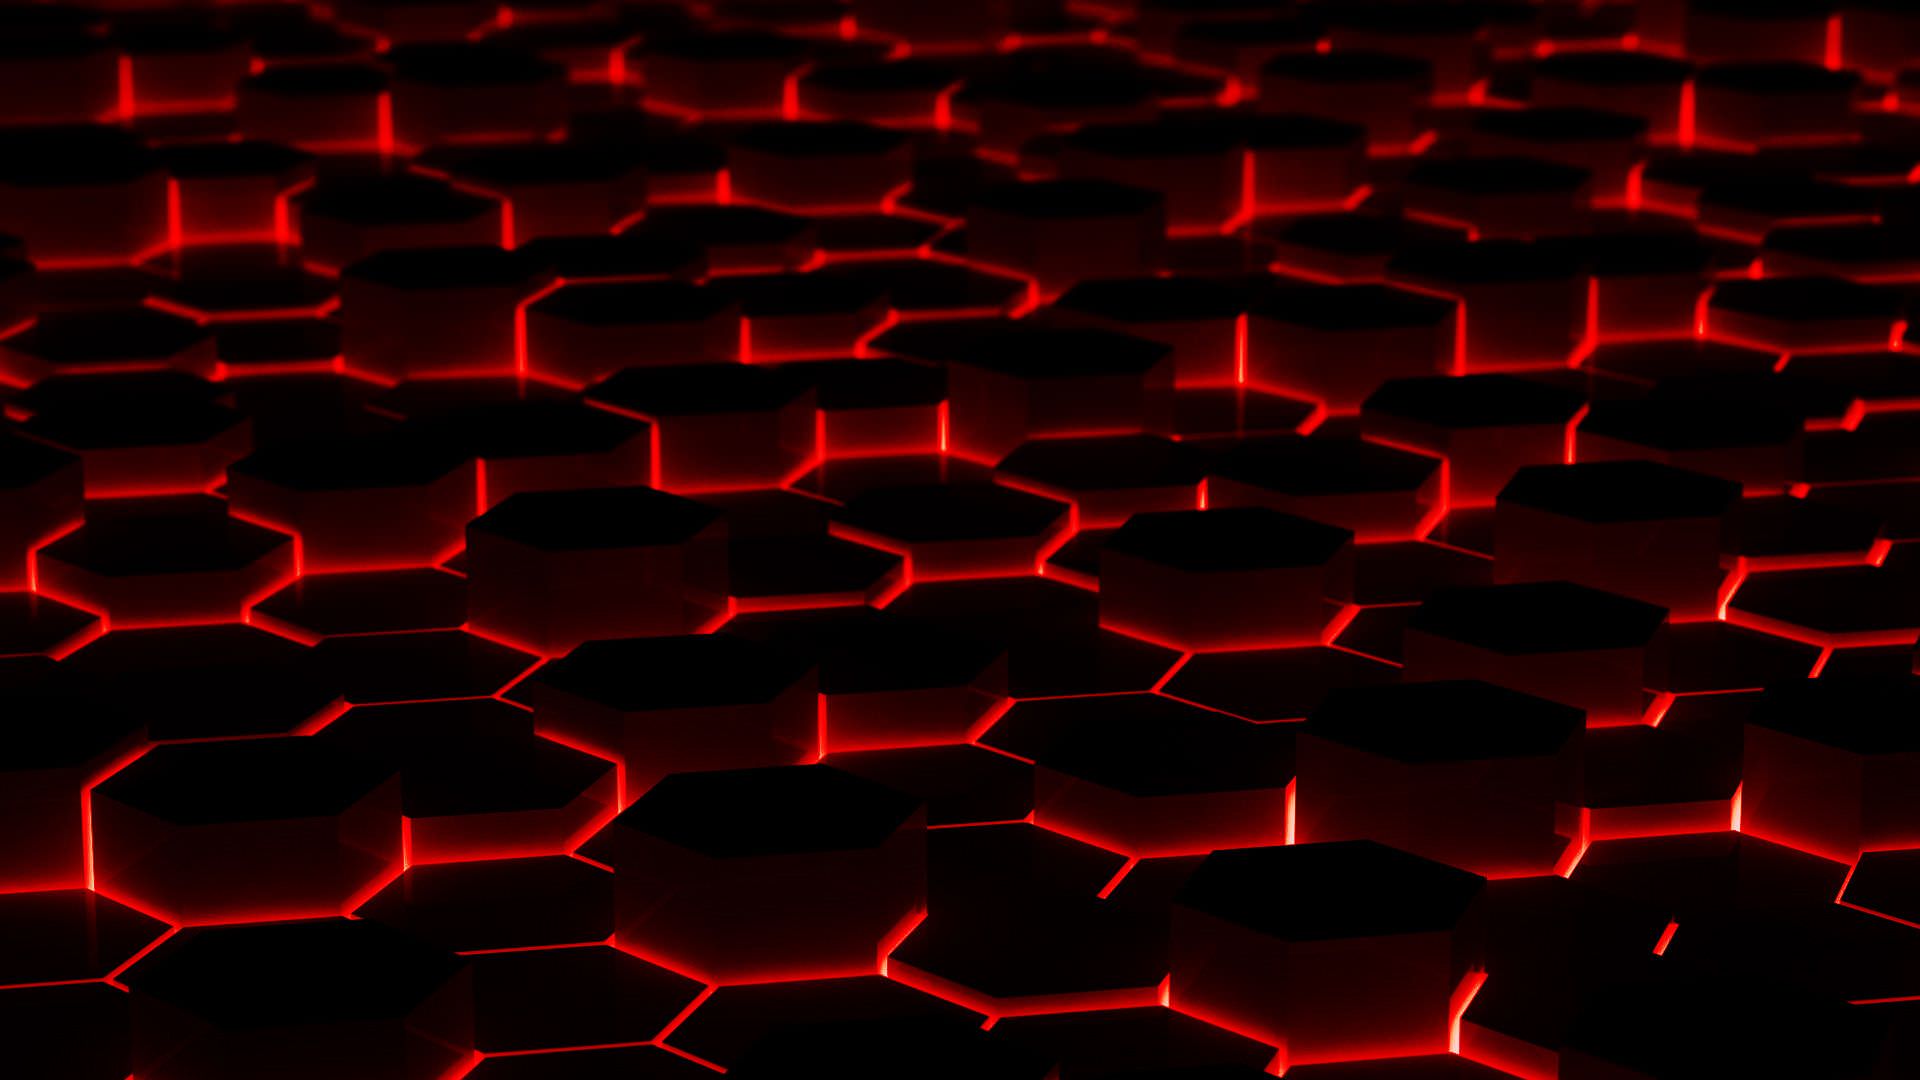 Red & Blaack Abstract Wallpaper